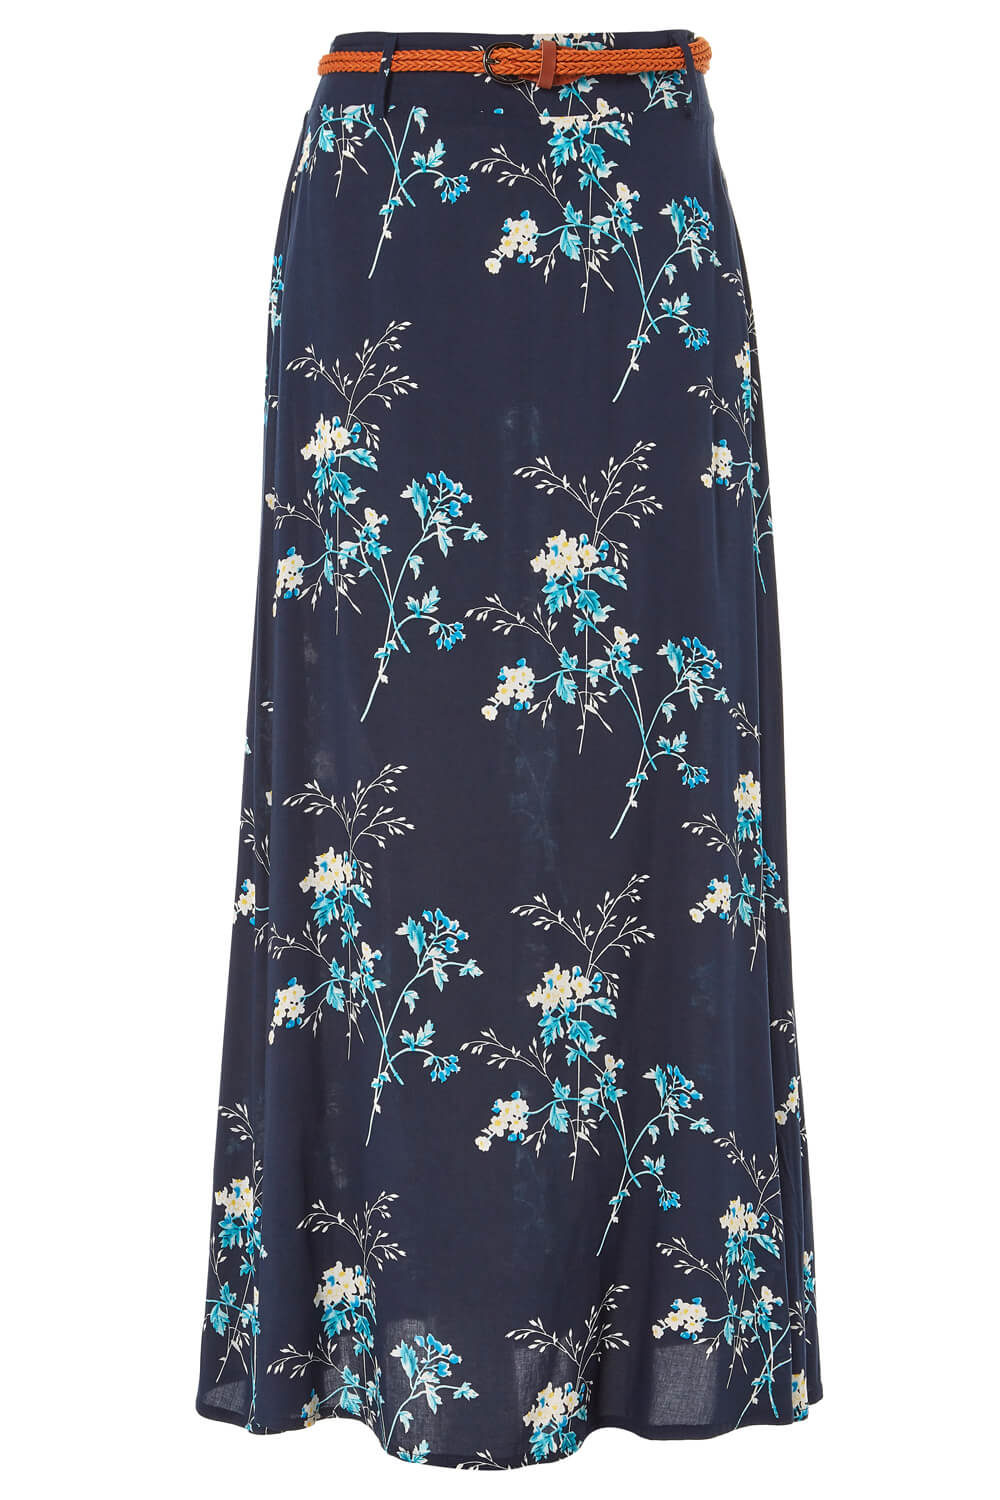 Navy  Floral Belted Maxi Skirt, Image 5 of 5